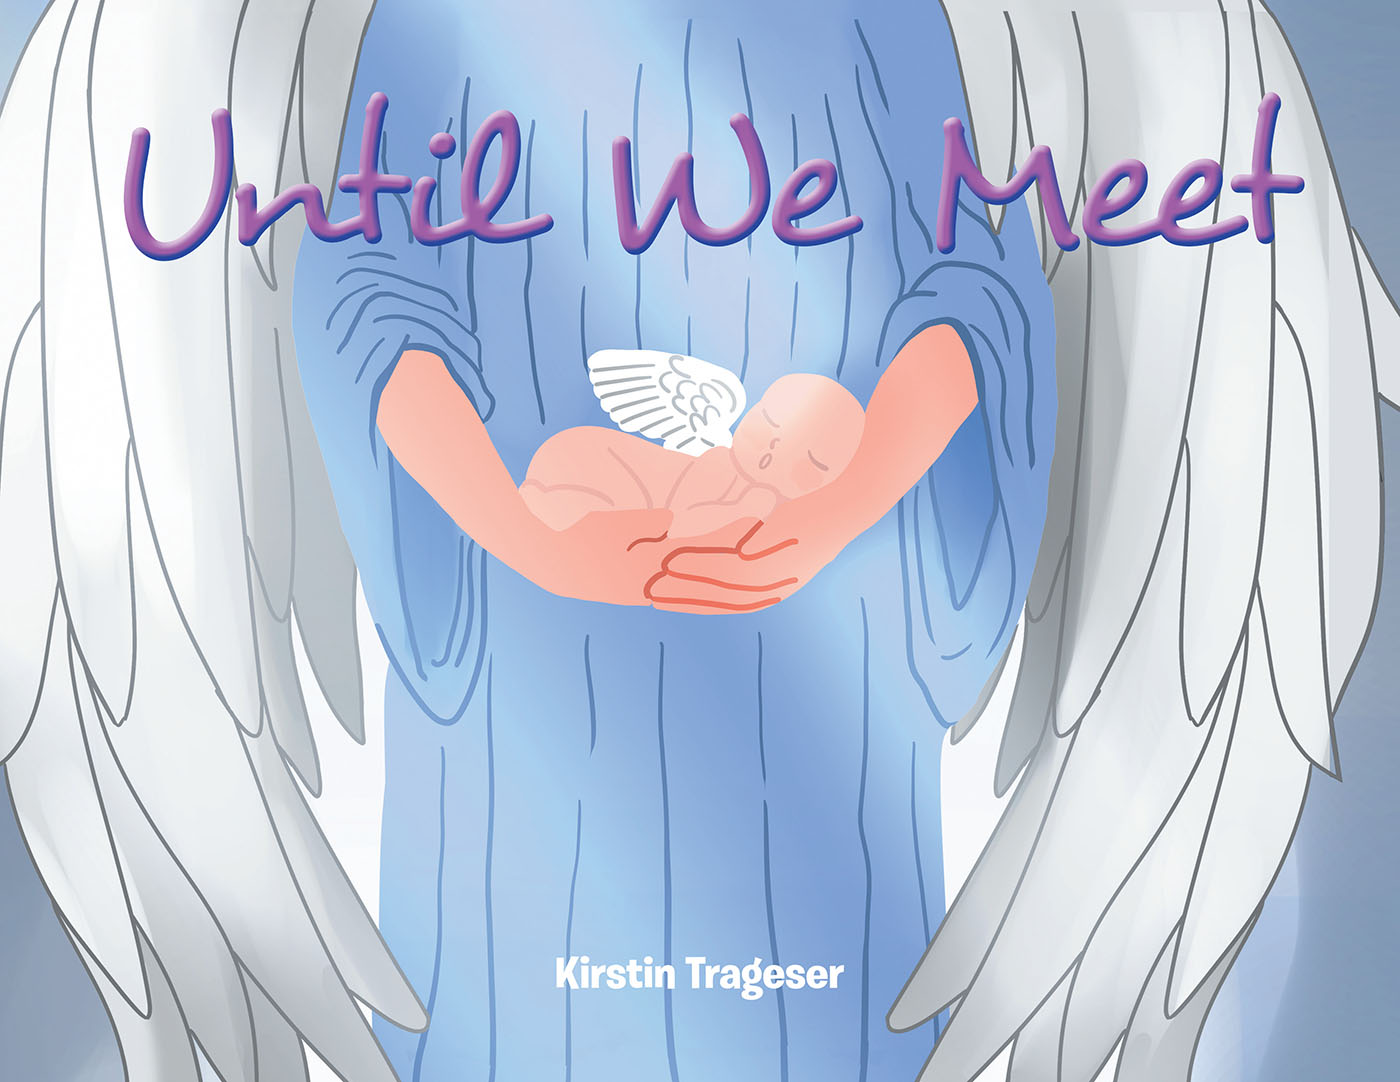 Kirstin Trageser’s Newly Released "Until We Meet" is a Heartfelt Message of Comfort and God’s Grace to Those Navigating the Loss of a Child